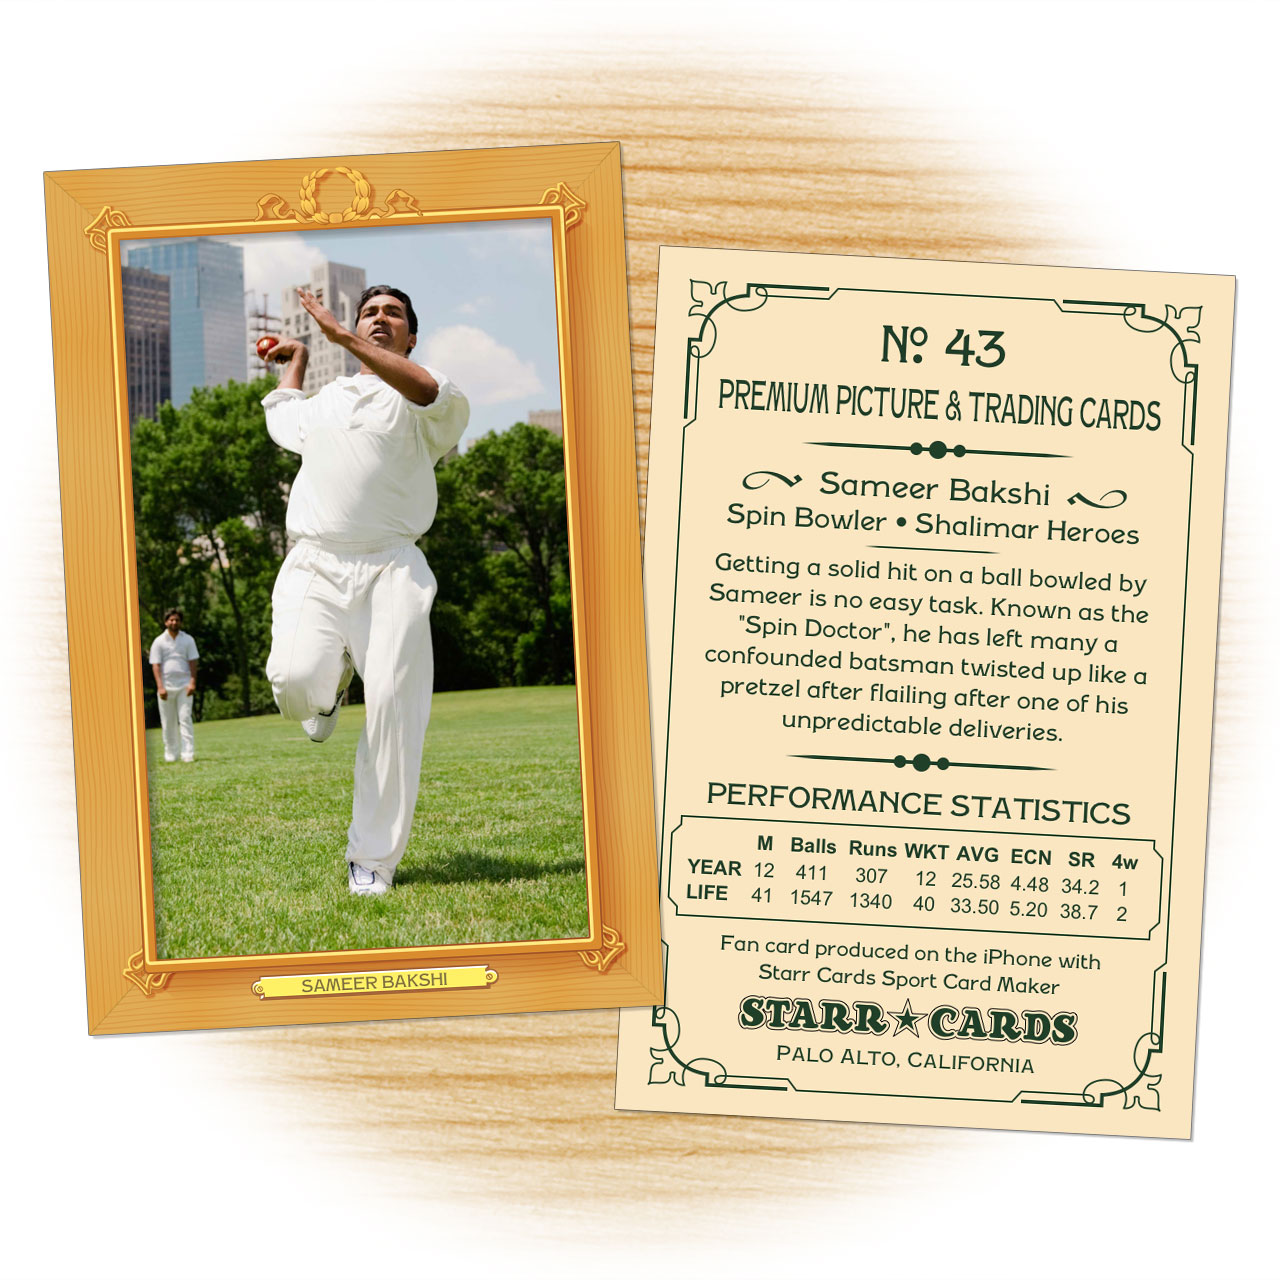 Cricket card template from Starr Cards Cricket Card Maker.